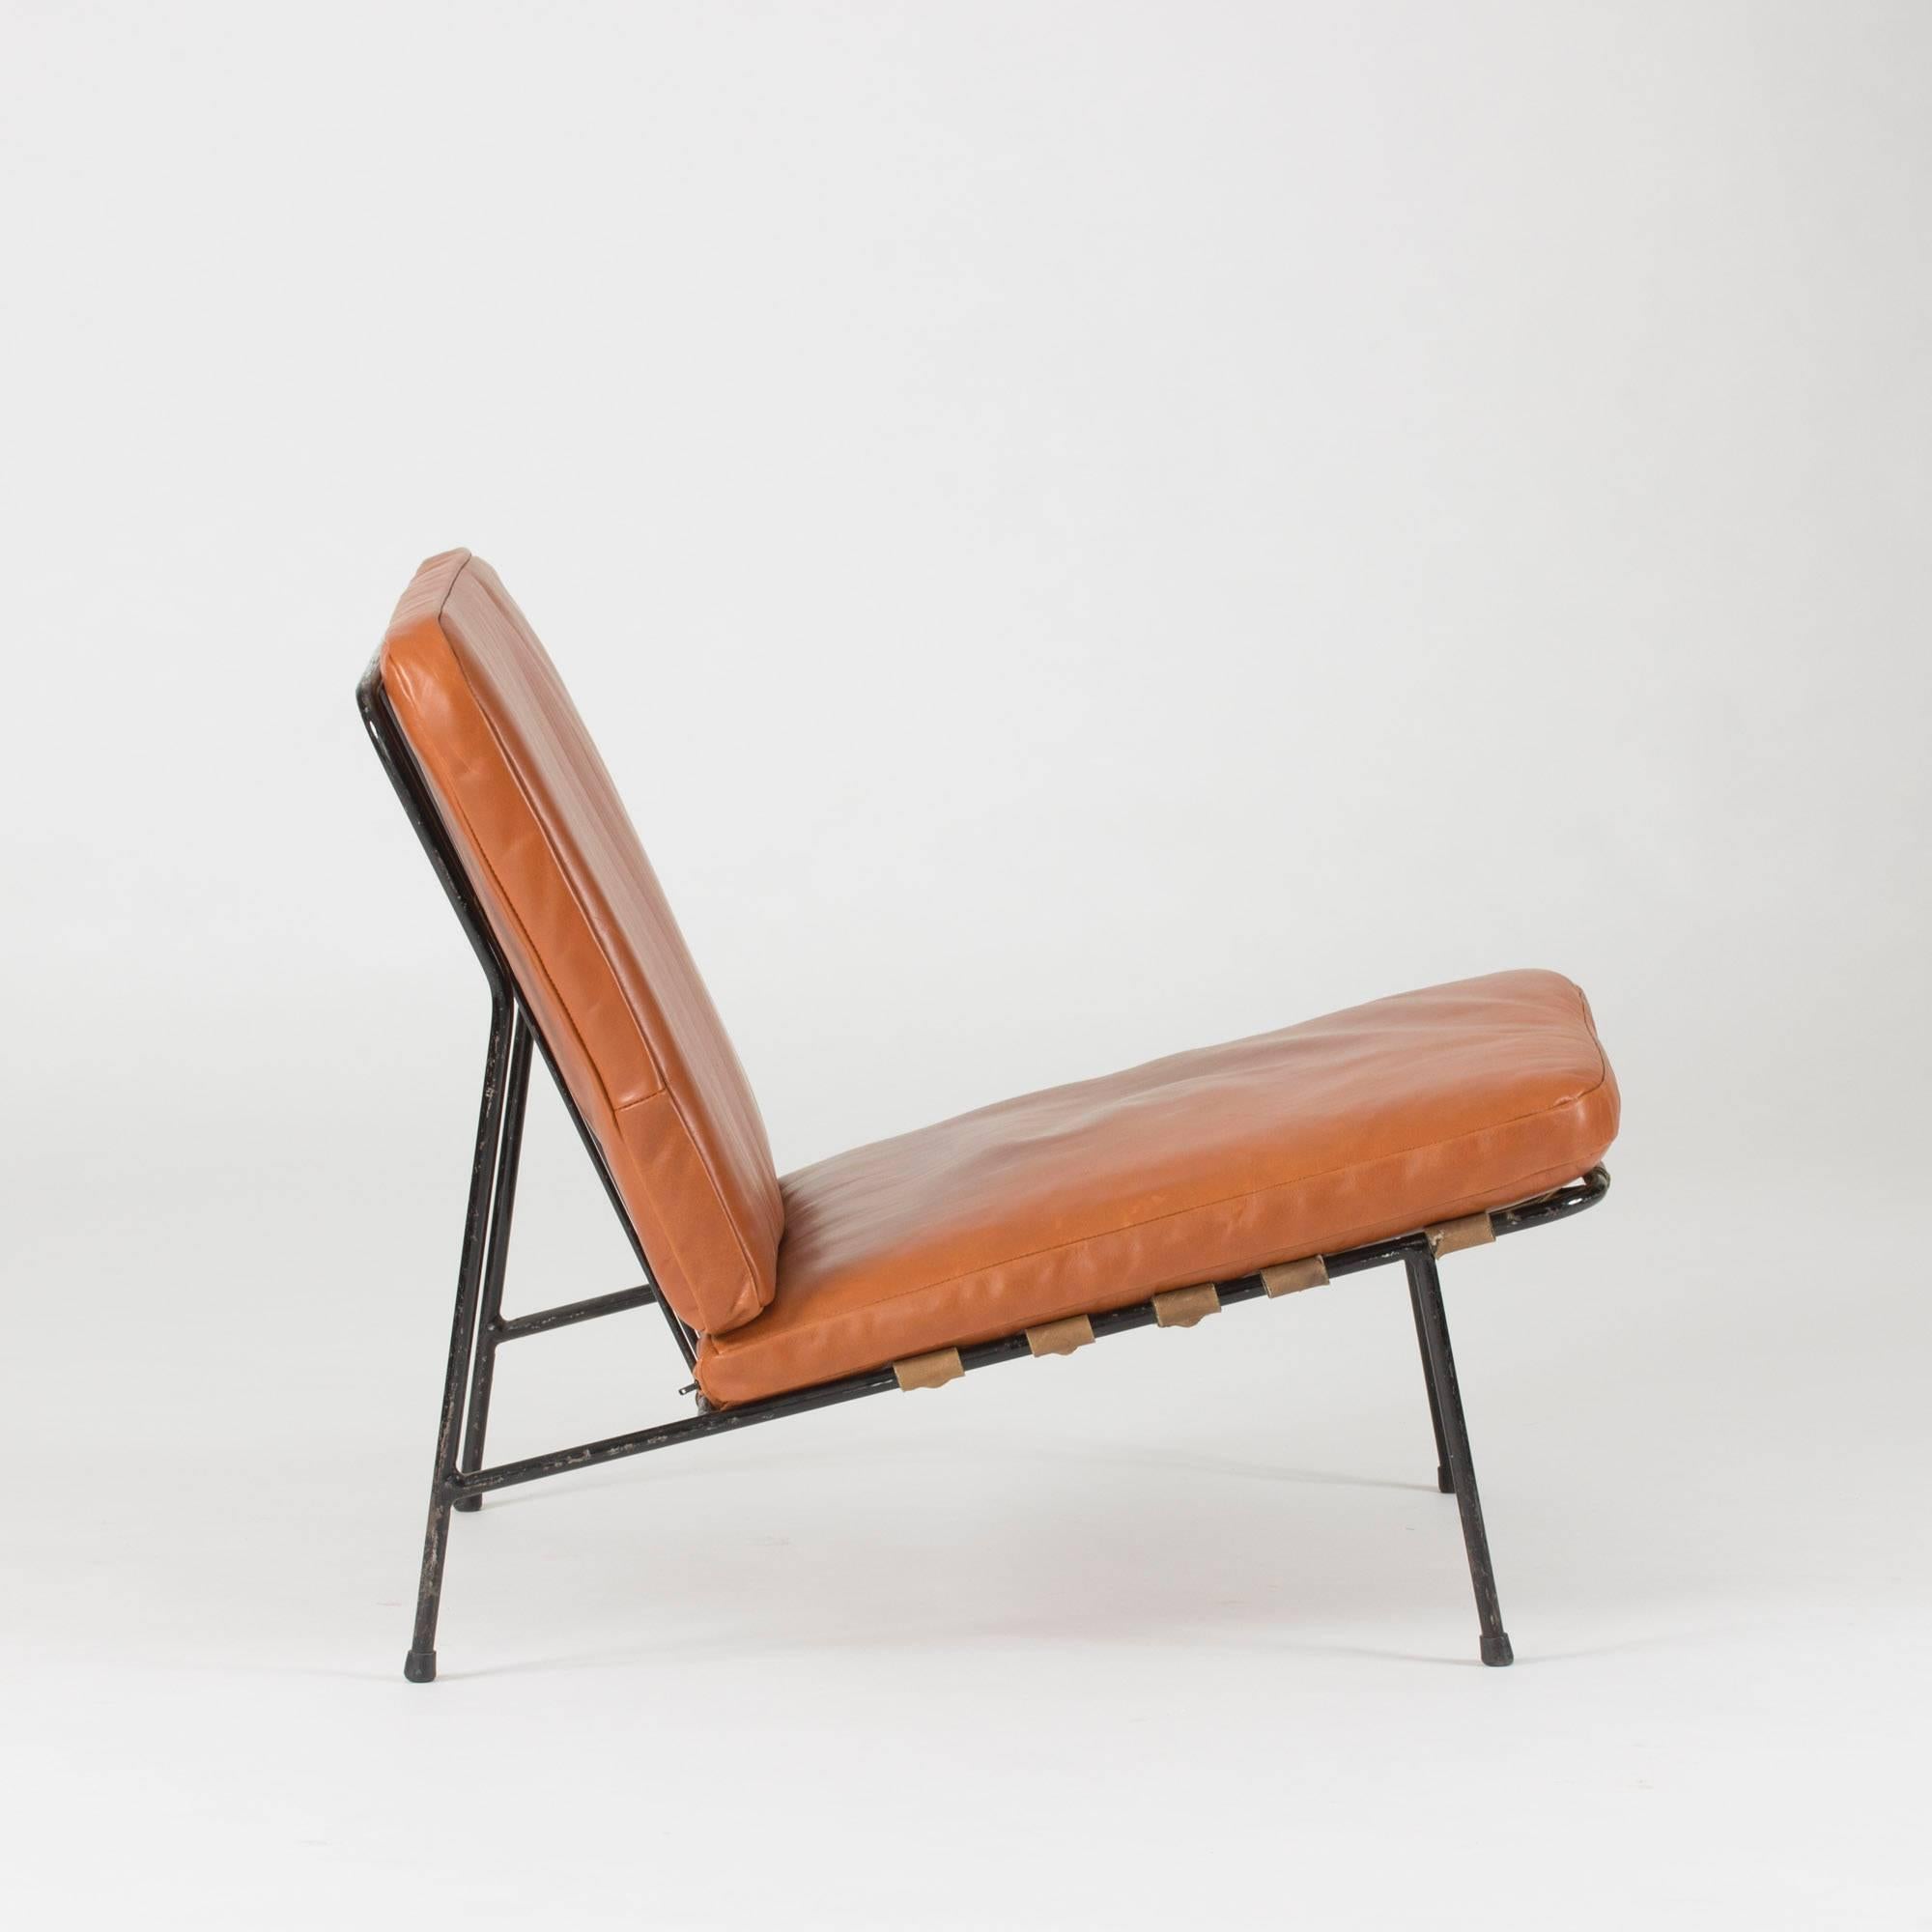 Lounge chair by Alf Svensson for Ljungs industries, later known as DUX, made in the 1950s. Black lacquered steel frame with removable cushions upholstered in luxurious cognac colored leather.

This model was first introduced at the iconic